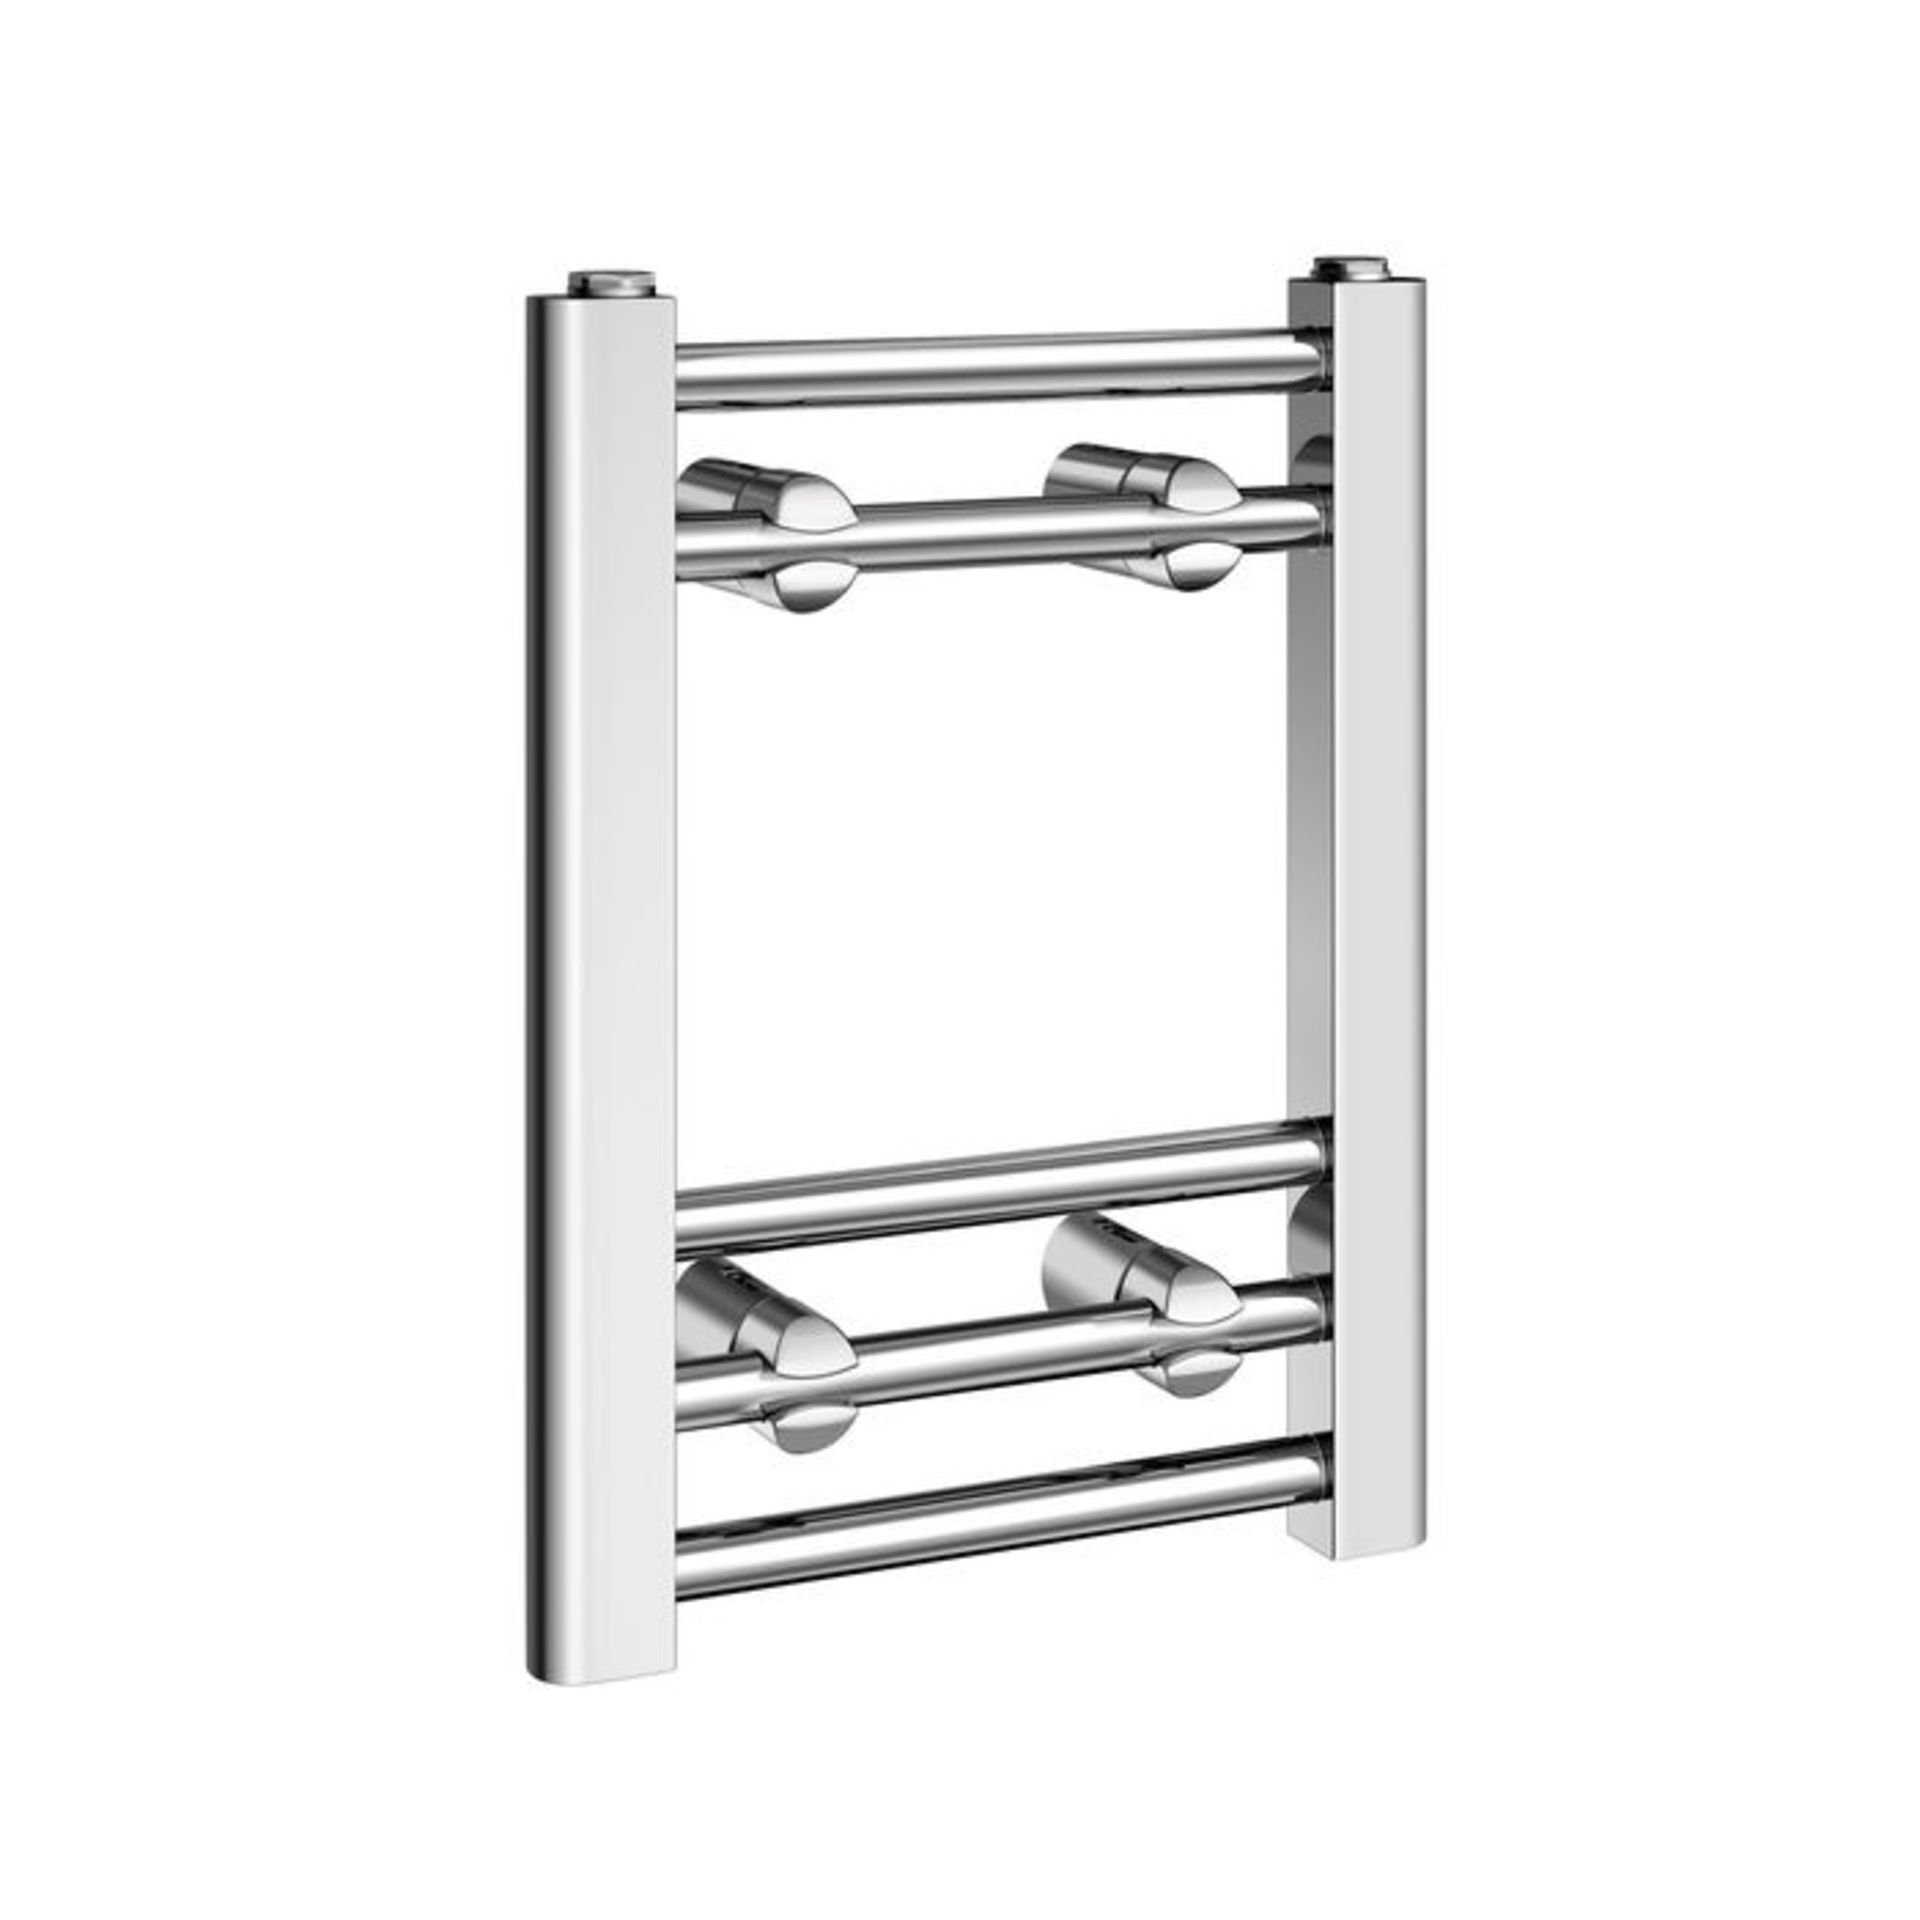 (P183) 400x300mm - 20mm Tubes - Chrome Heated Straight Rail Ladder Towel Rail. Low carbon steel - Image 3 of 3